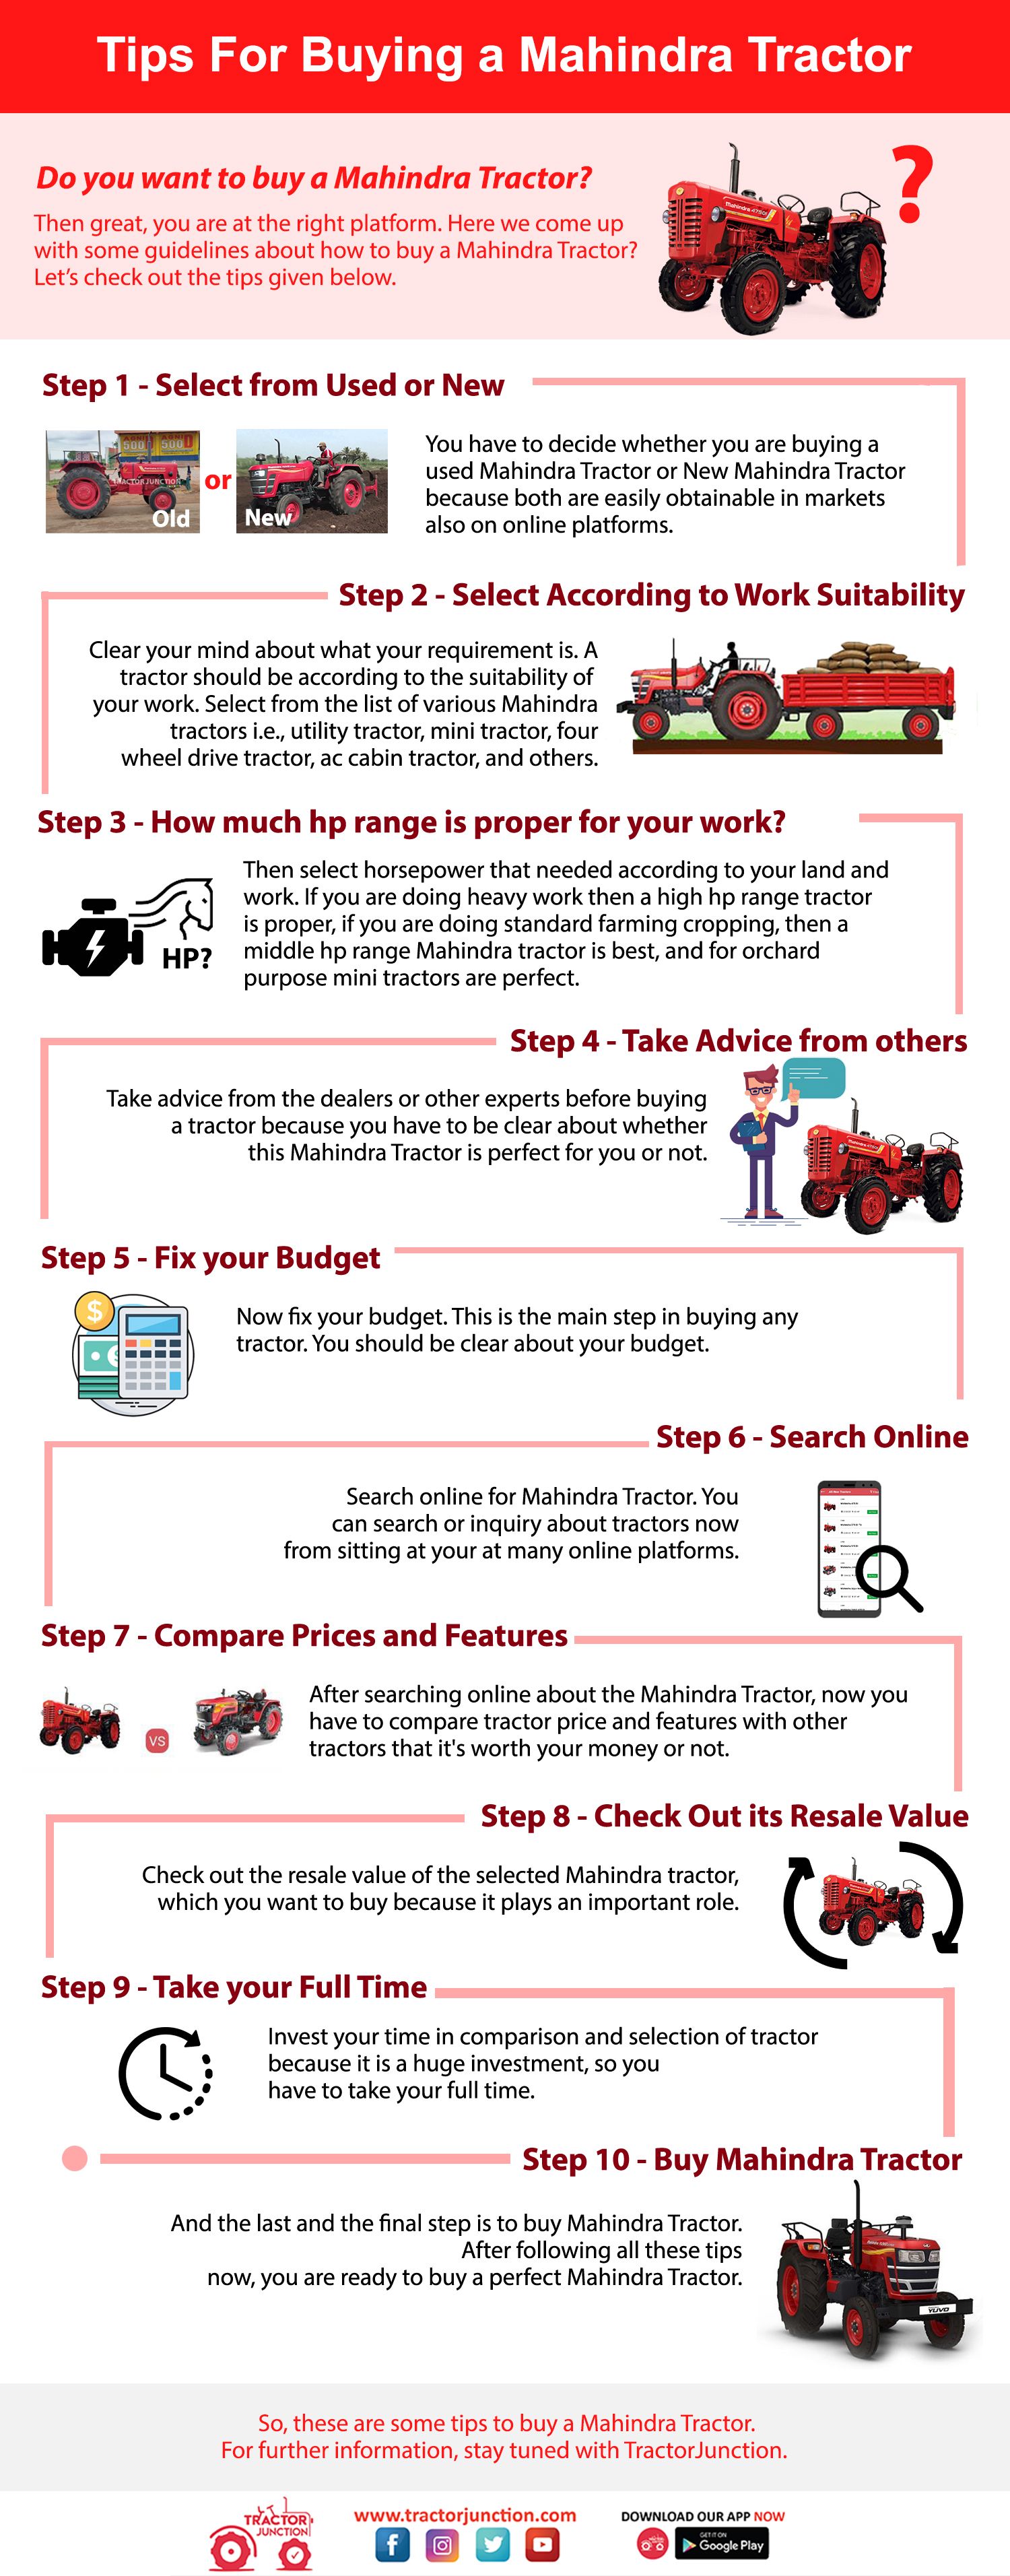 Tips For Buying a Mahindra Tractor